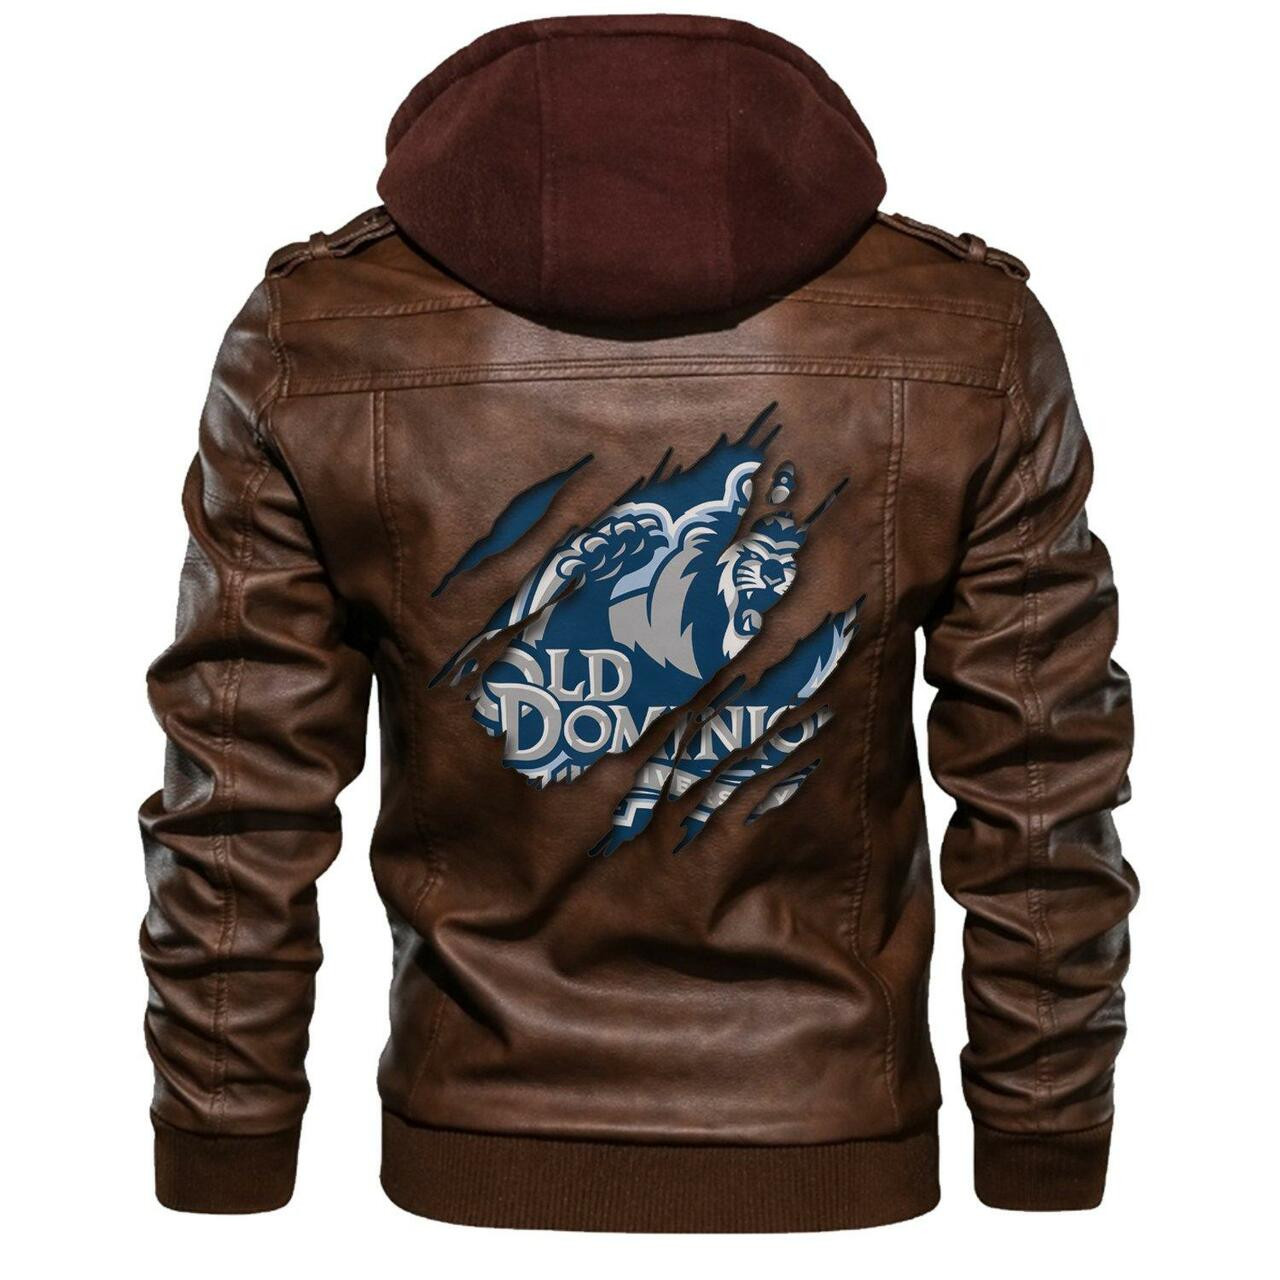 Don't wait another minute, Get Hot Leather Jacket today 129